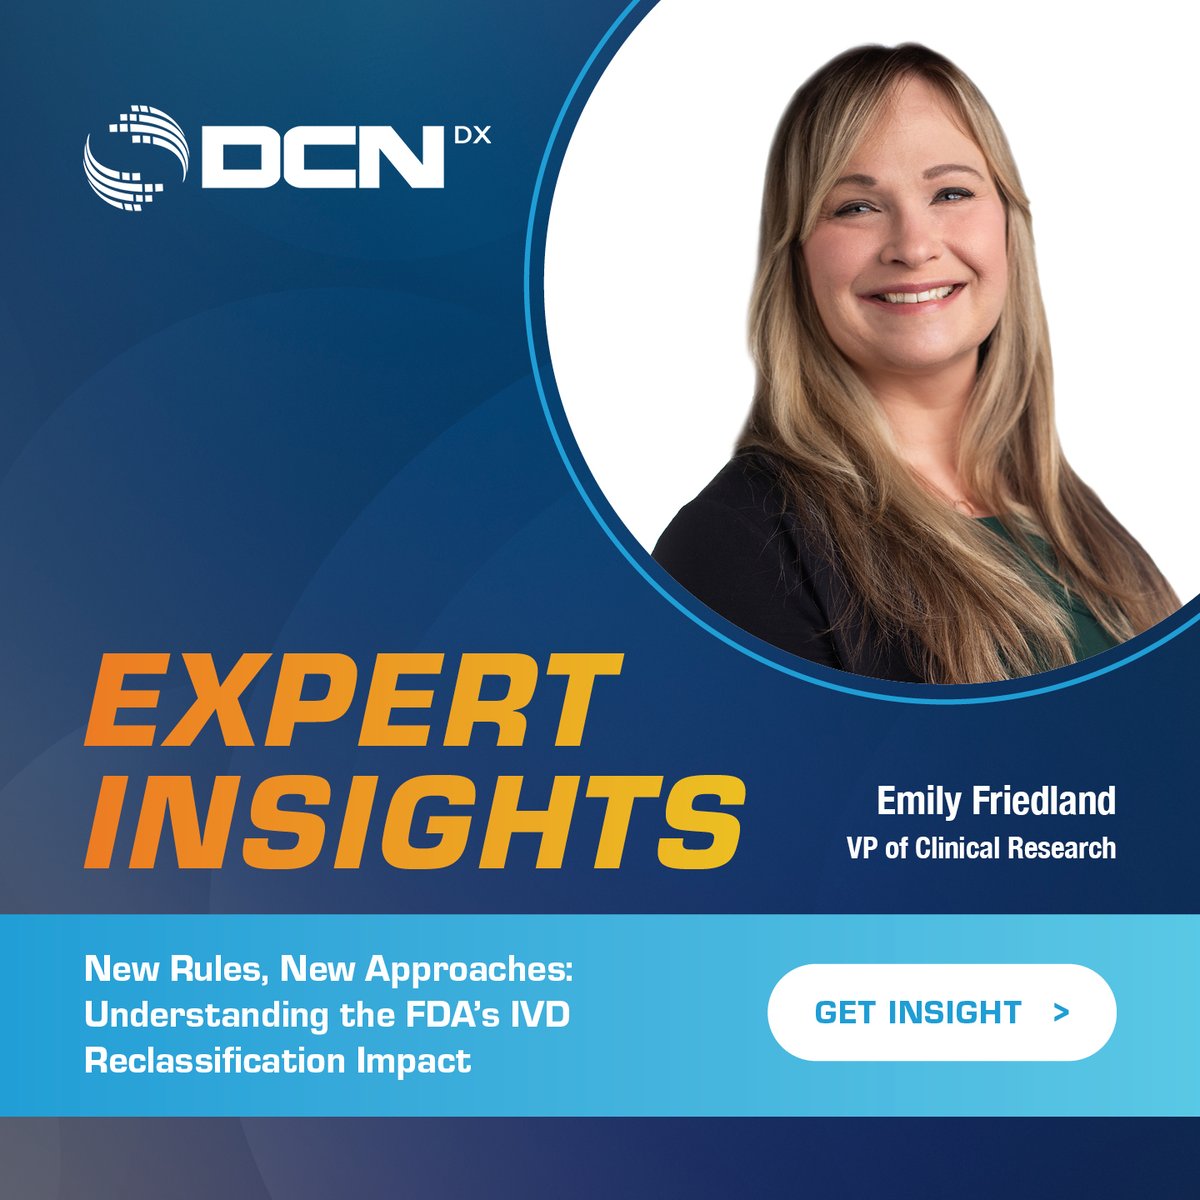 🦠 In our recent #ExpertInsights article, our VP of Clinical Research delves into the FDA's recent decision to reclassify certain #infectiousdisease #IVDs from Class III to Class II. 
hubs.ly/Q02ryrRM0

#DCNDx #FDA #Regulatory #ClinicalStudies #Diagnostics